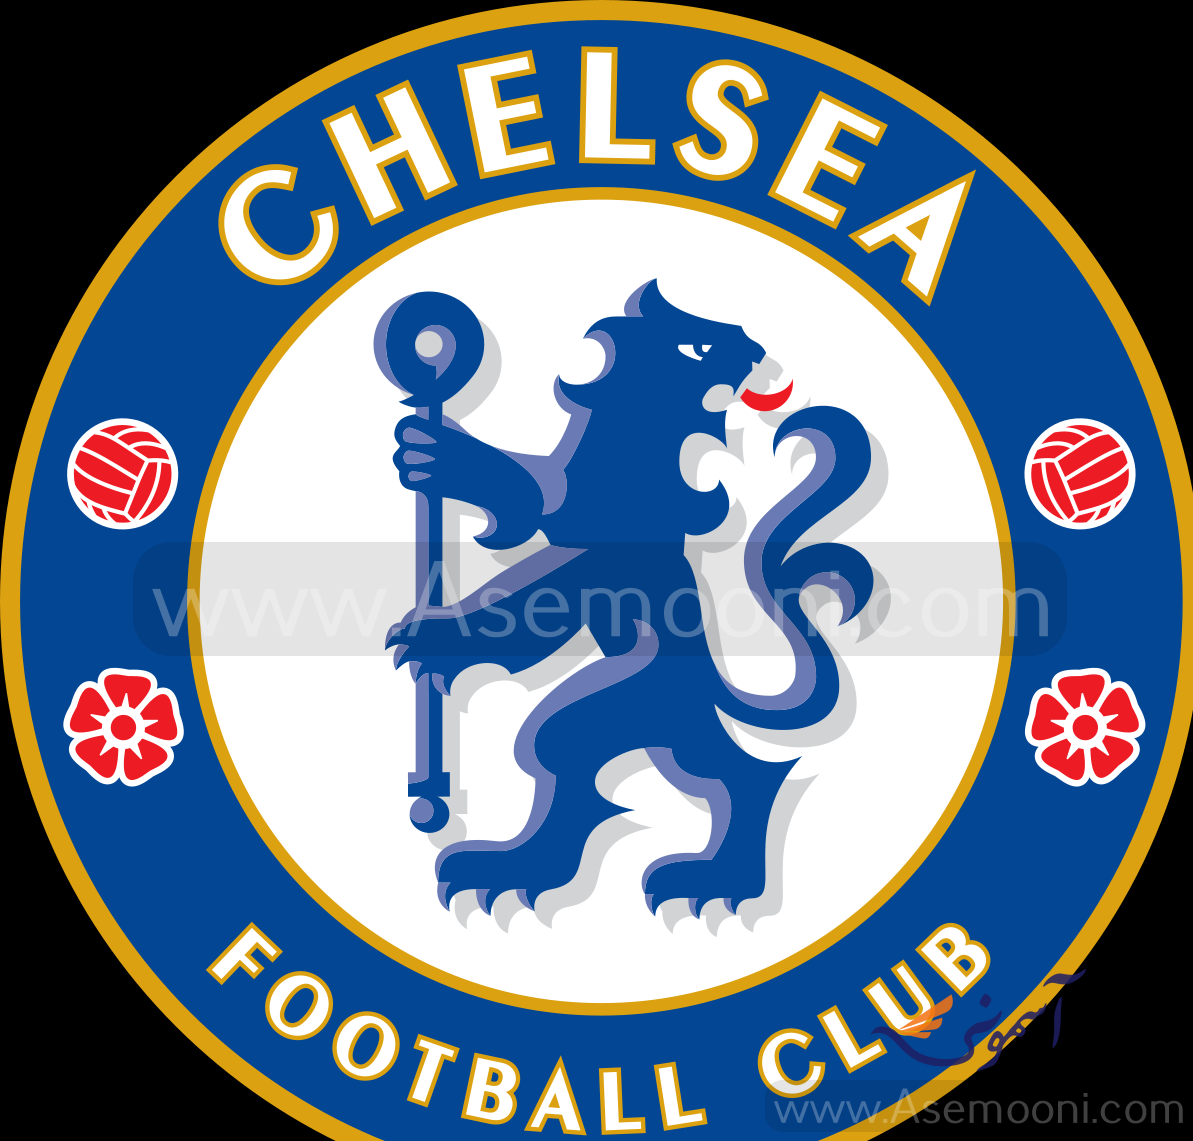 chelsea-logo-during-time